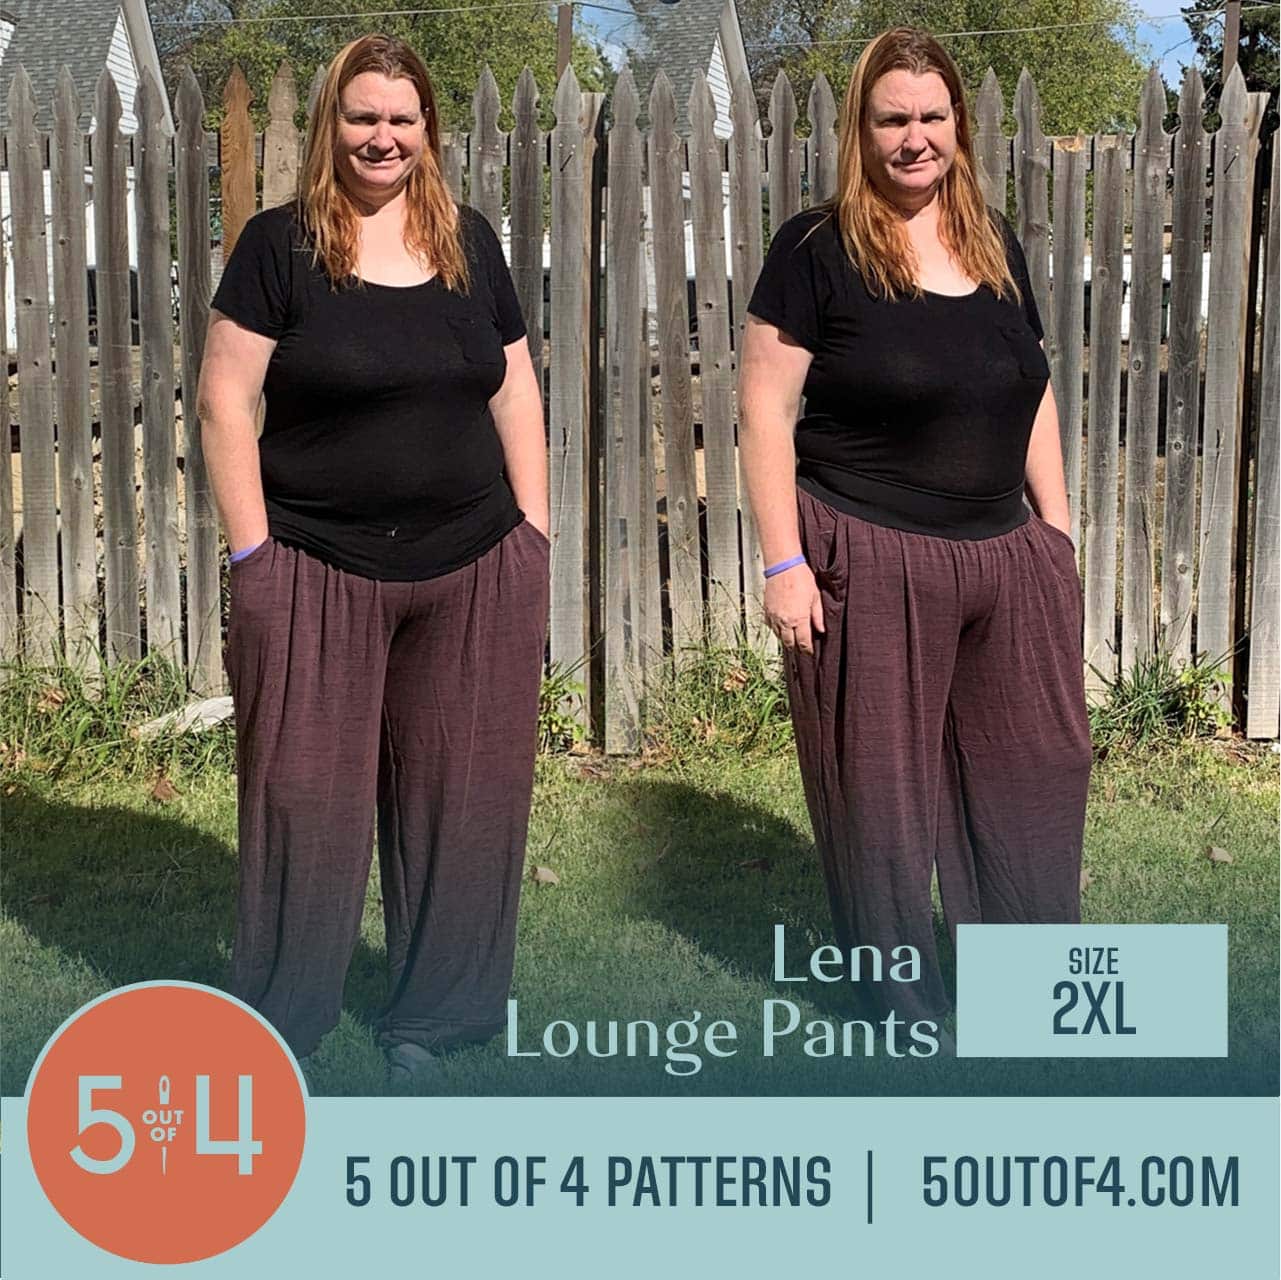 Lena Lounge Pants - 5 out of 4 Patterns